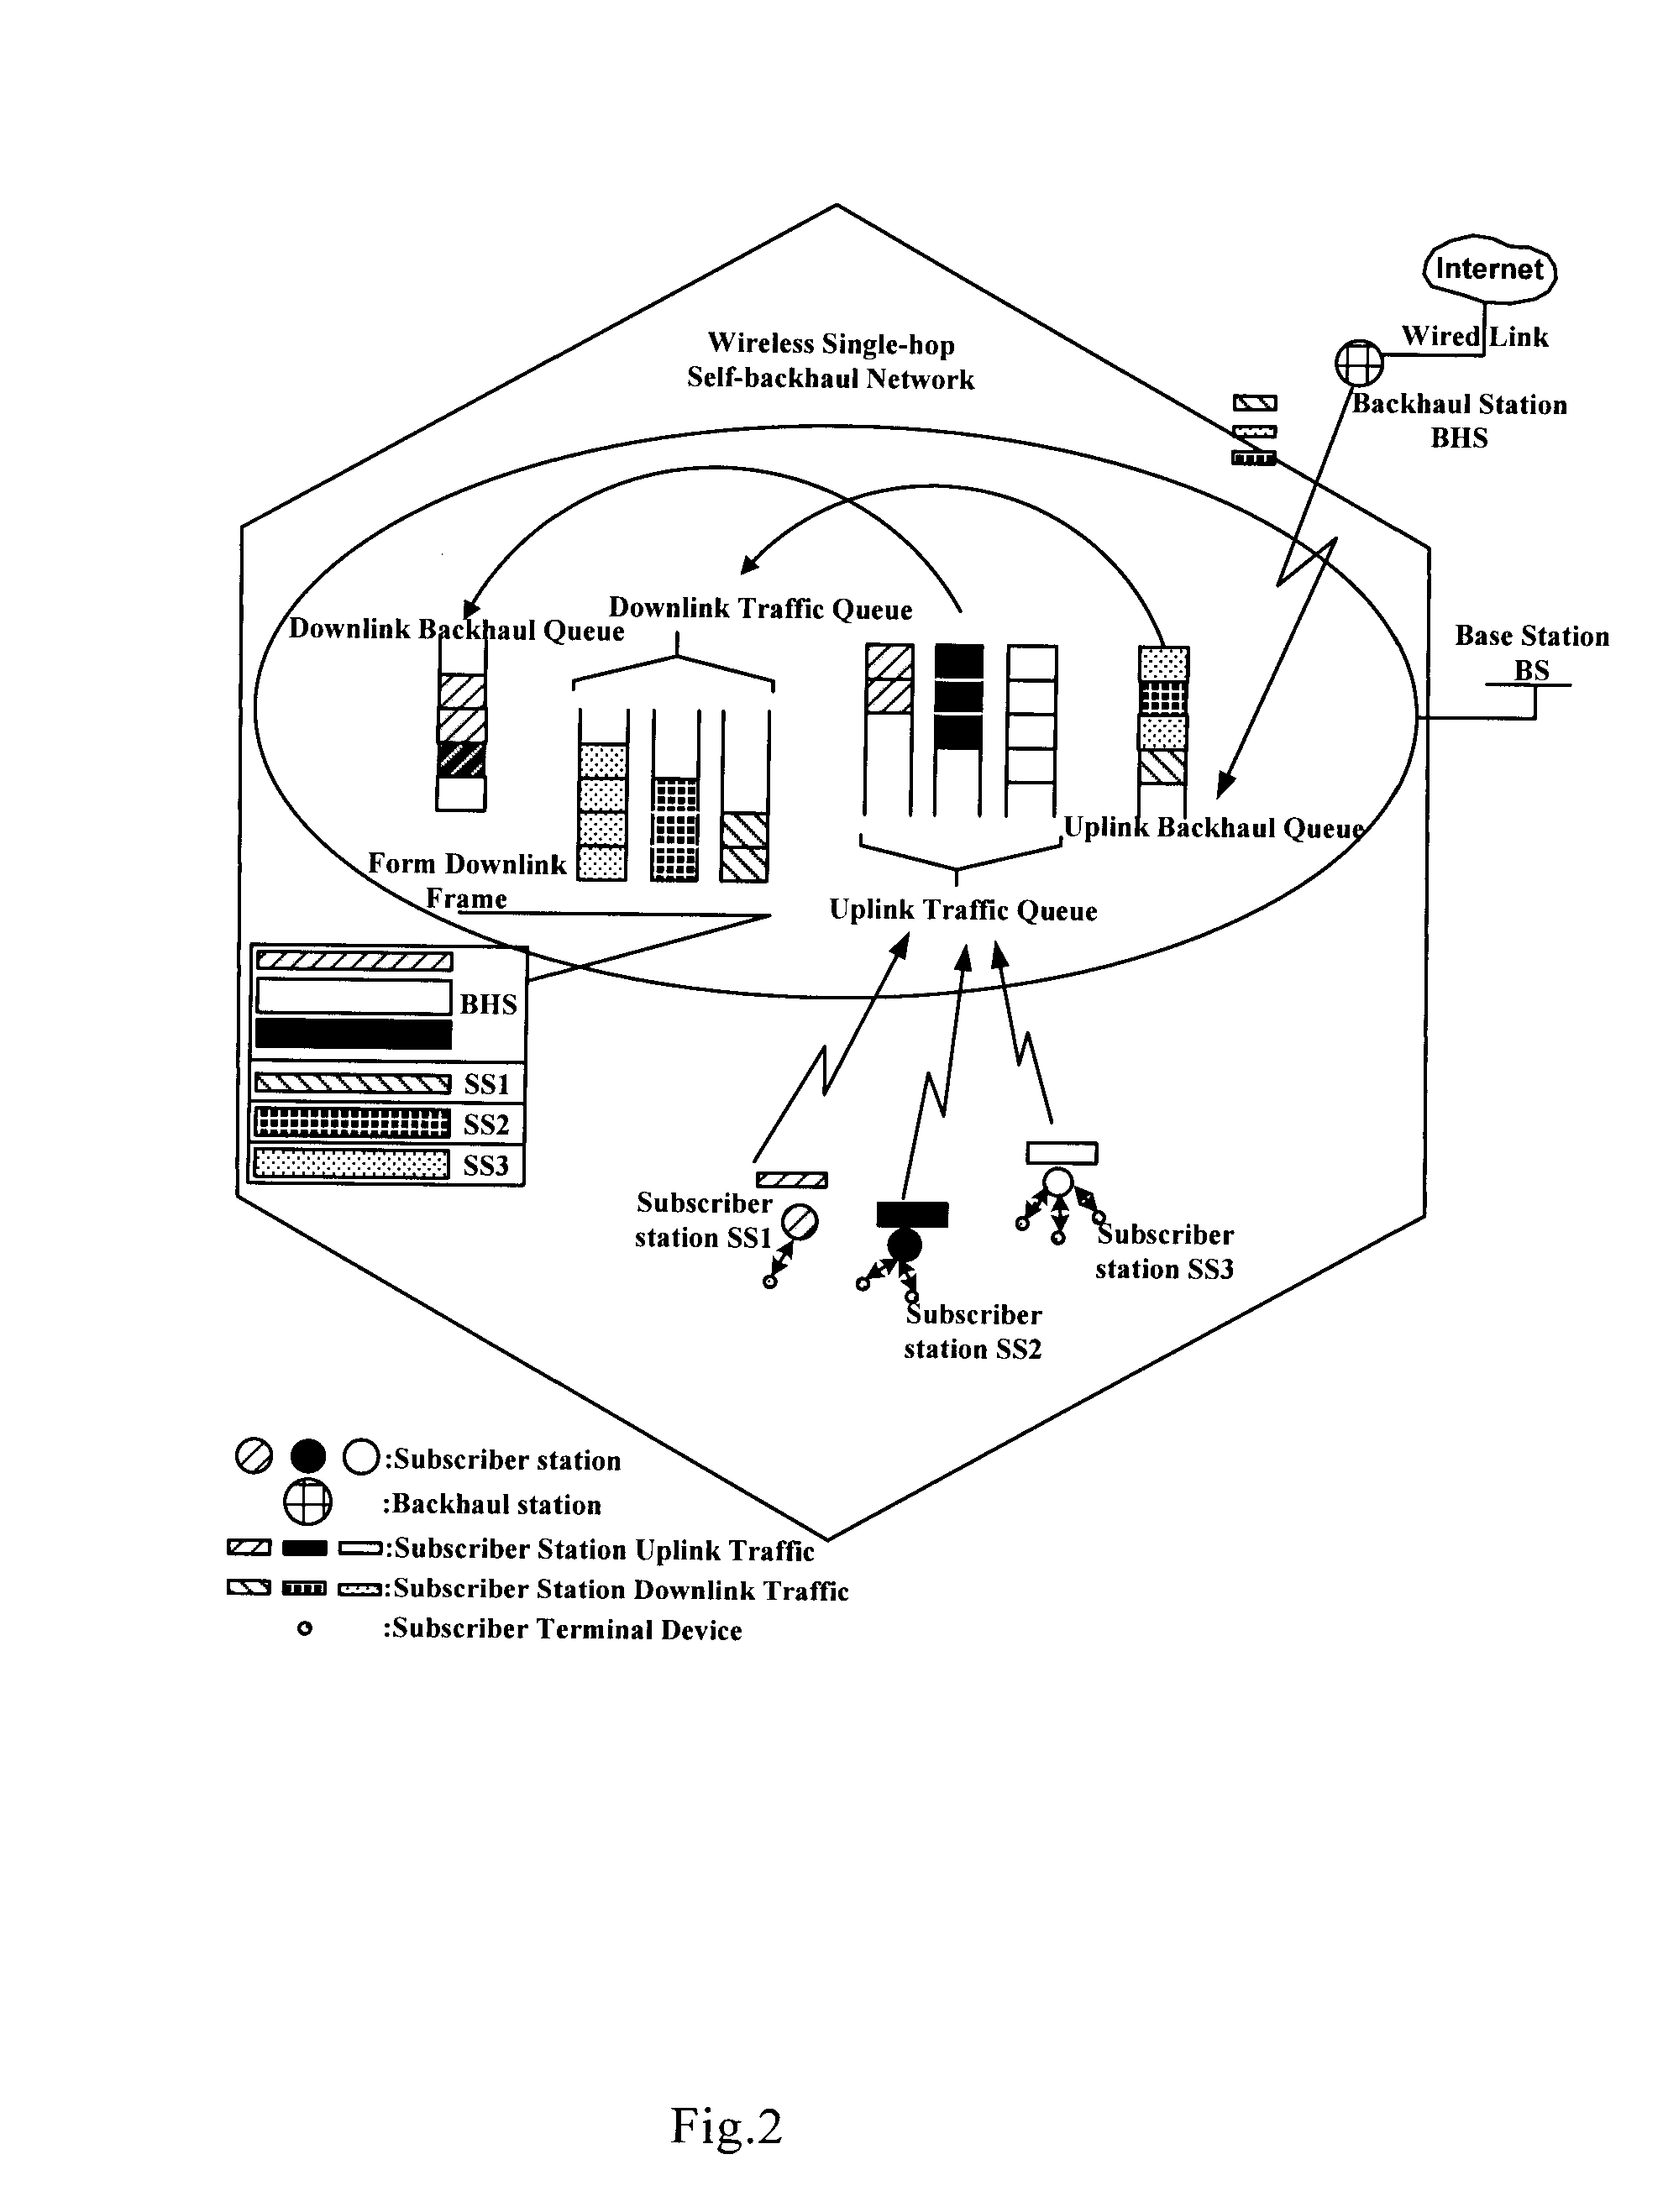 Method and base station for bandwidth allocation in wireless single-hop self-backhaul networks